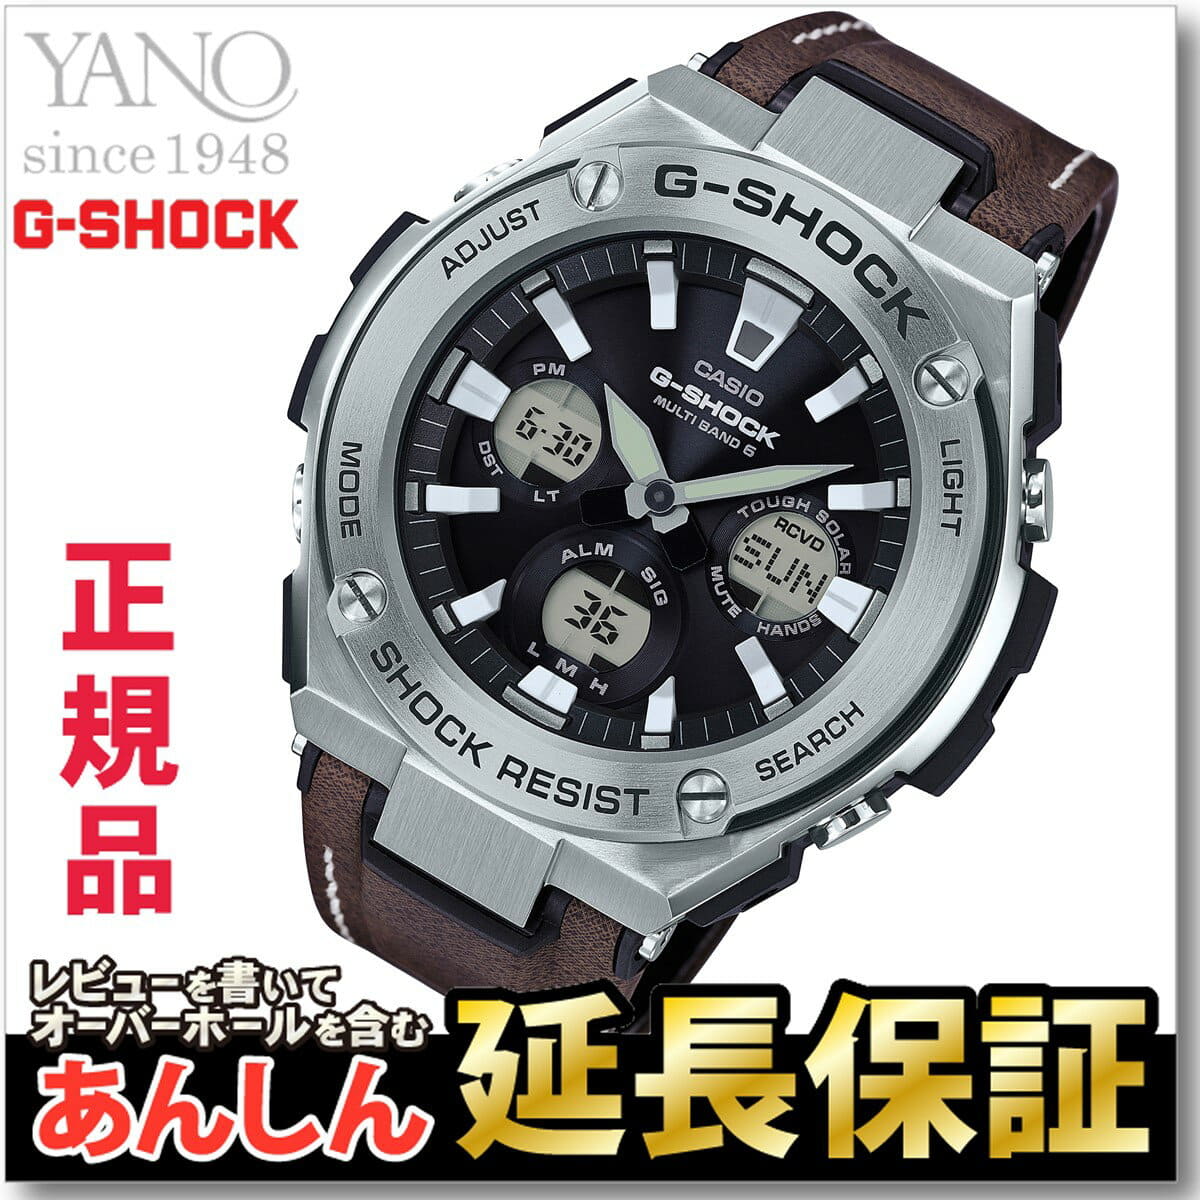 New] Casio G-Shock GST-W130L-1AJF G-STEEL tough leather electric wave solar  men watch radio time signal tough solar G-STEEL CASIO G-SHOCK [0217] - BE  FORWARD Store